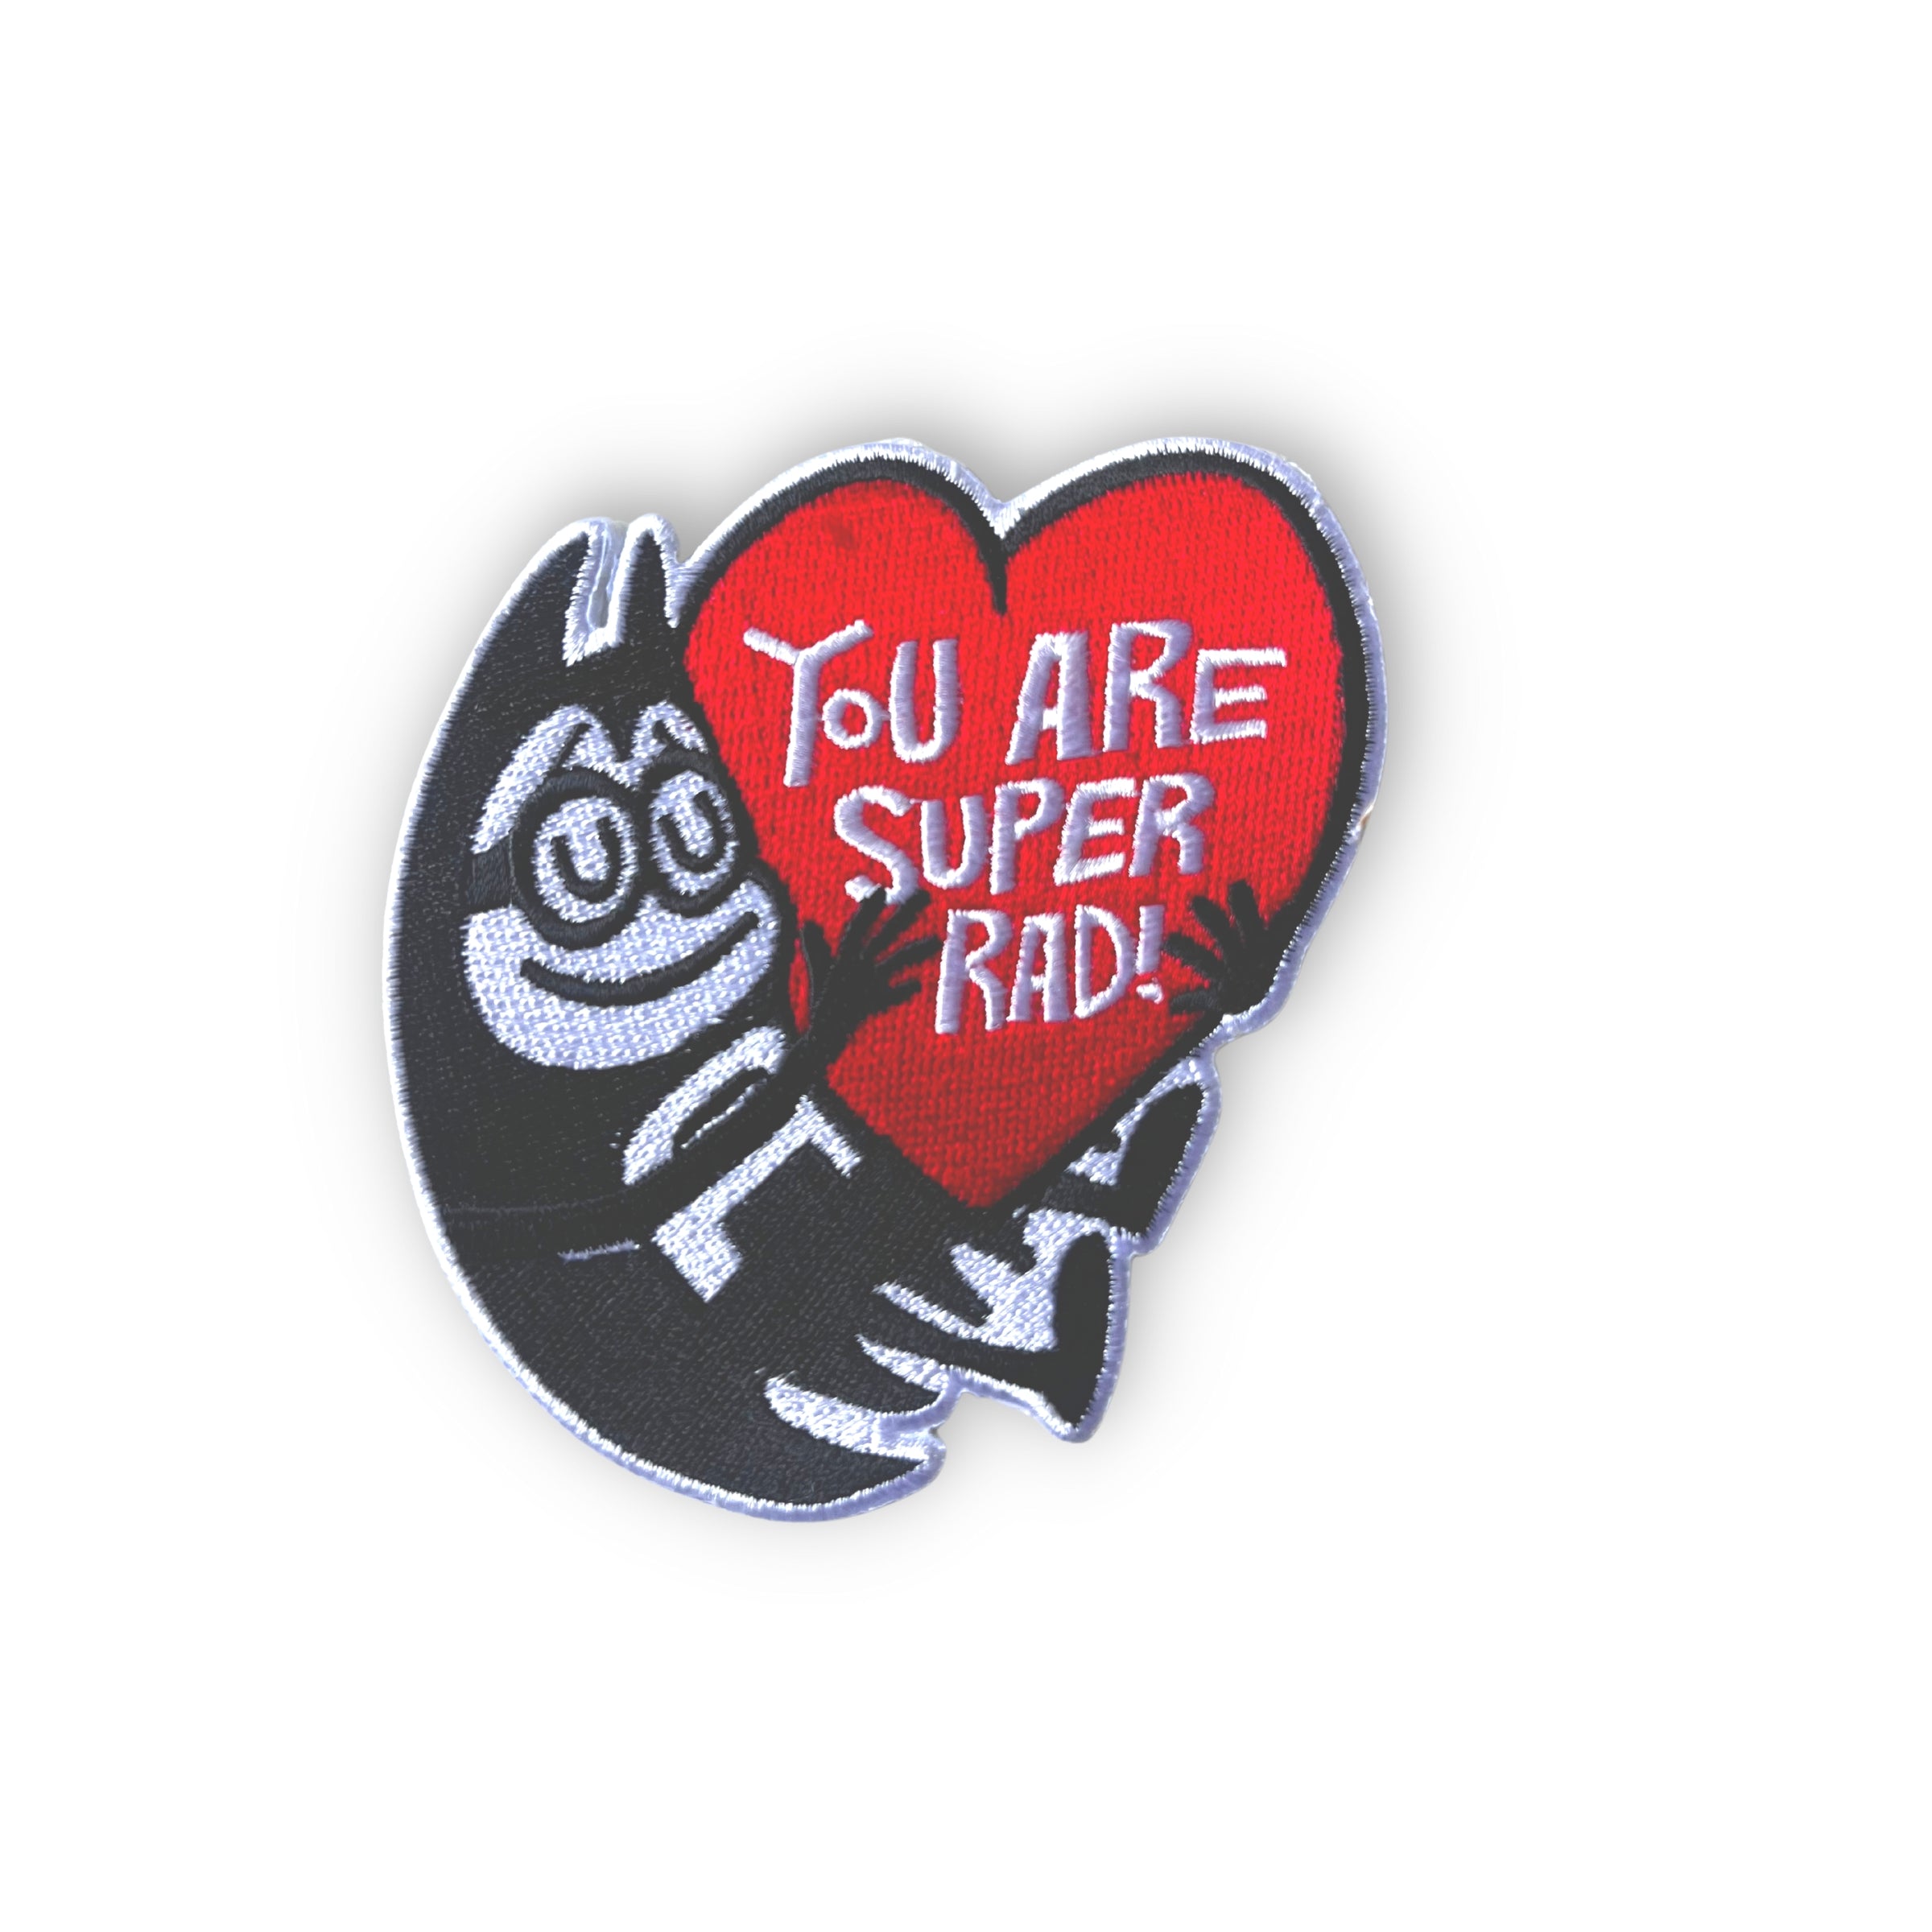 Lil Bat "You Are Super Rad!" Deluxe Patch!